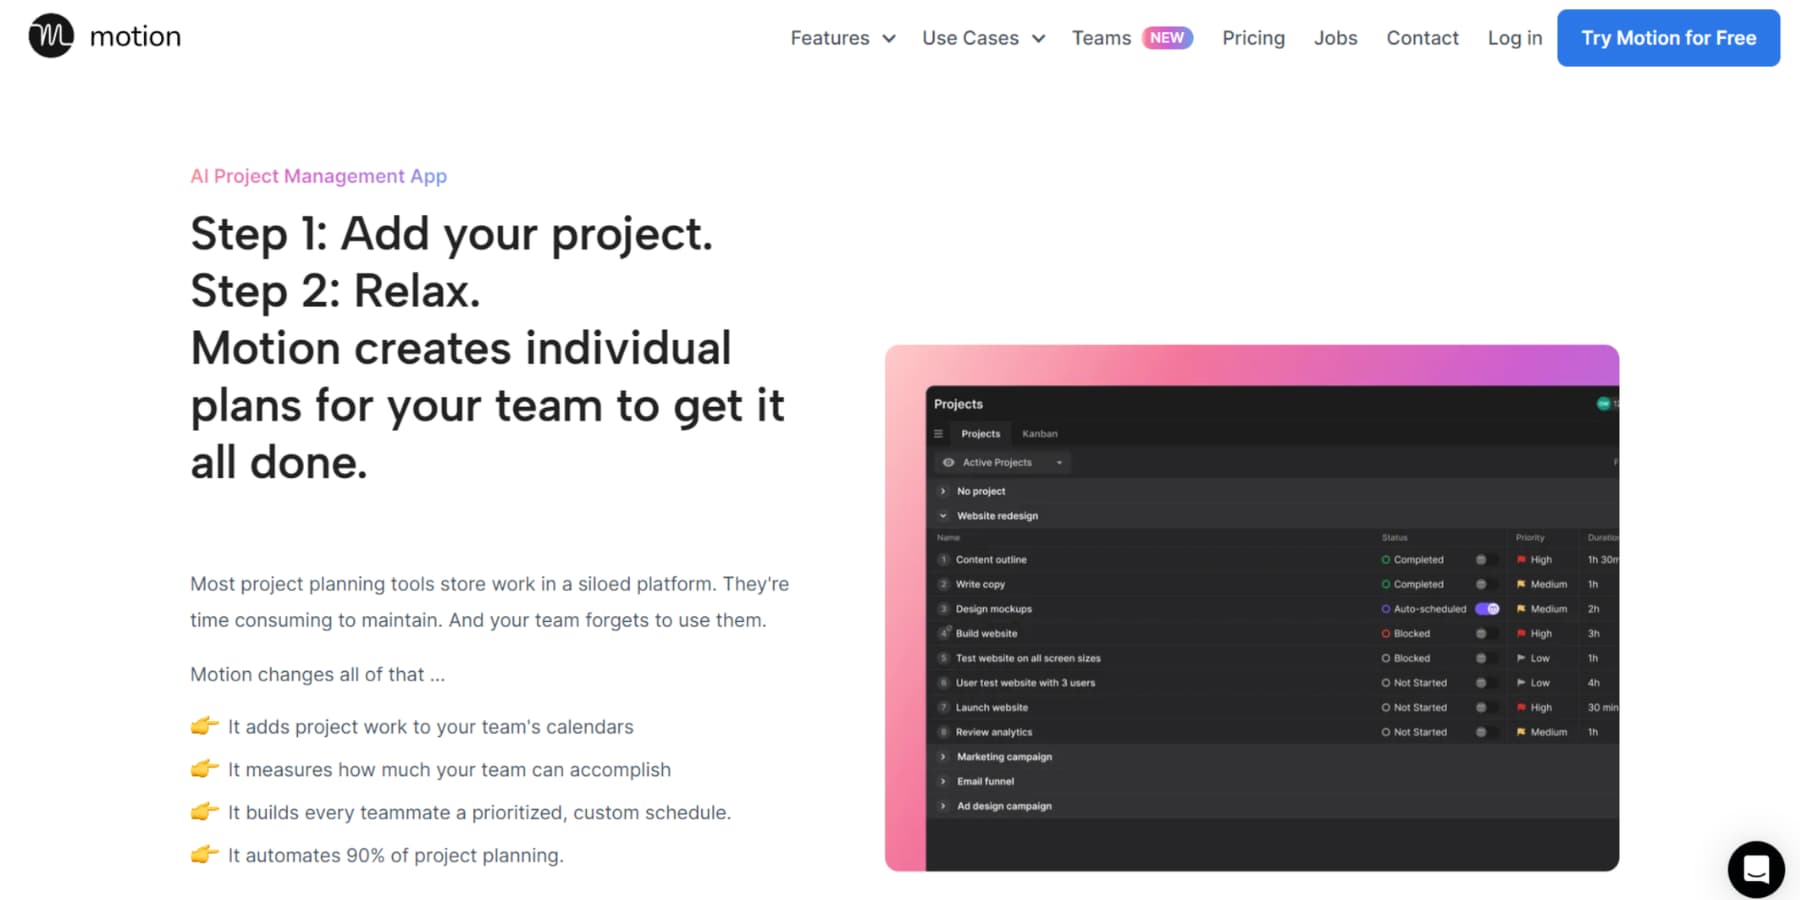 A screenshot of Motion's project management app demonstration on its website